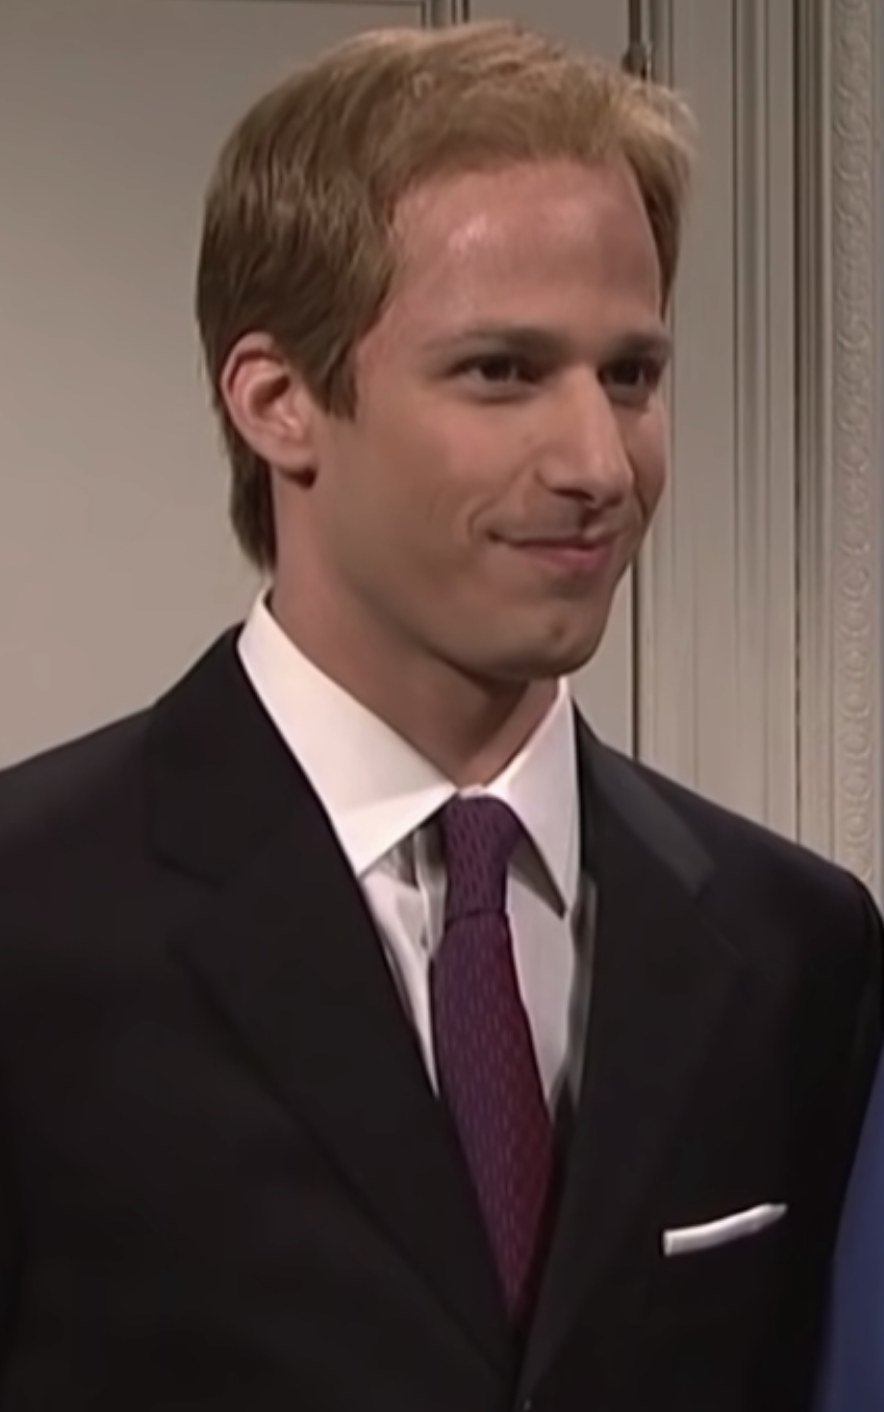 Samberg wearing a suit and tie and a Prince William-like hairdo